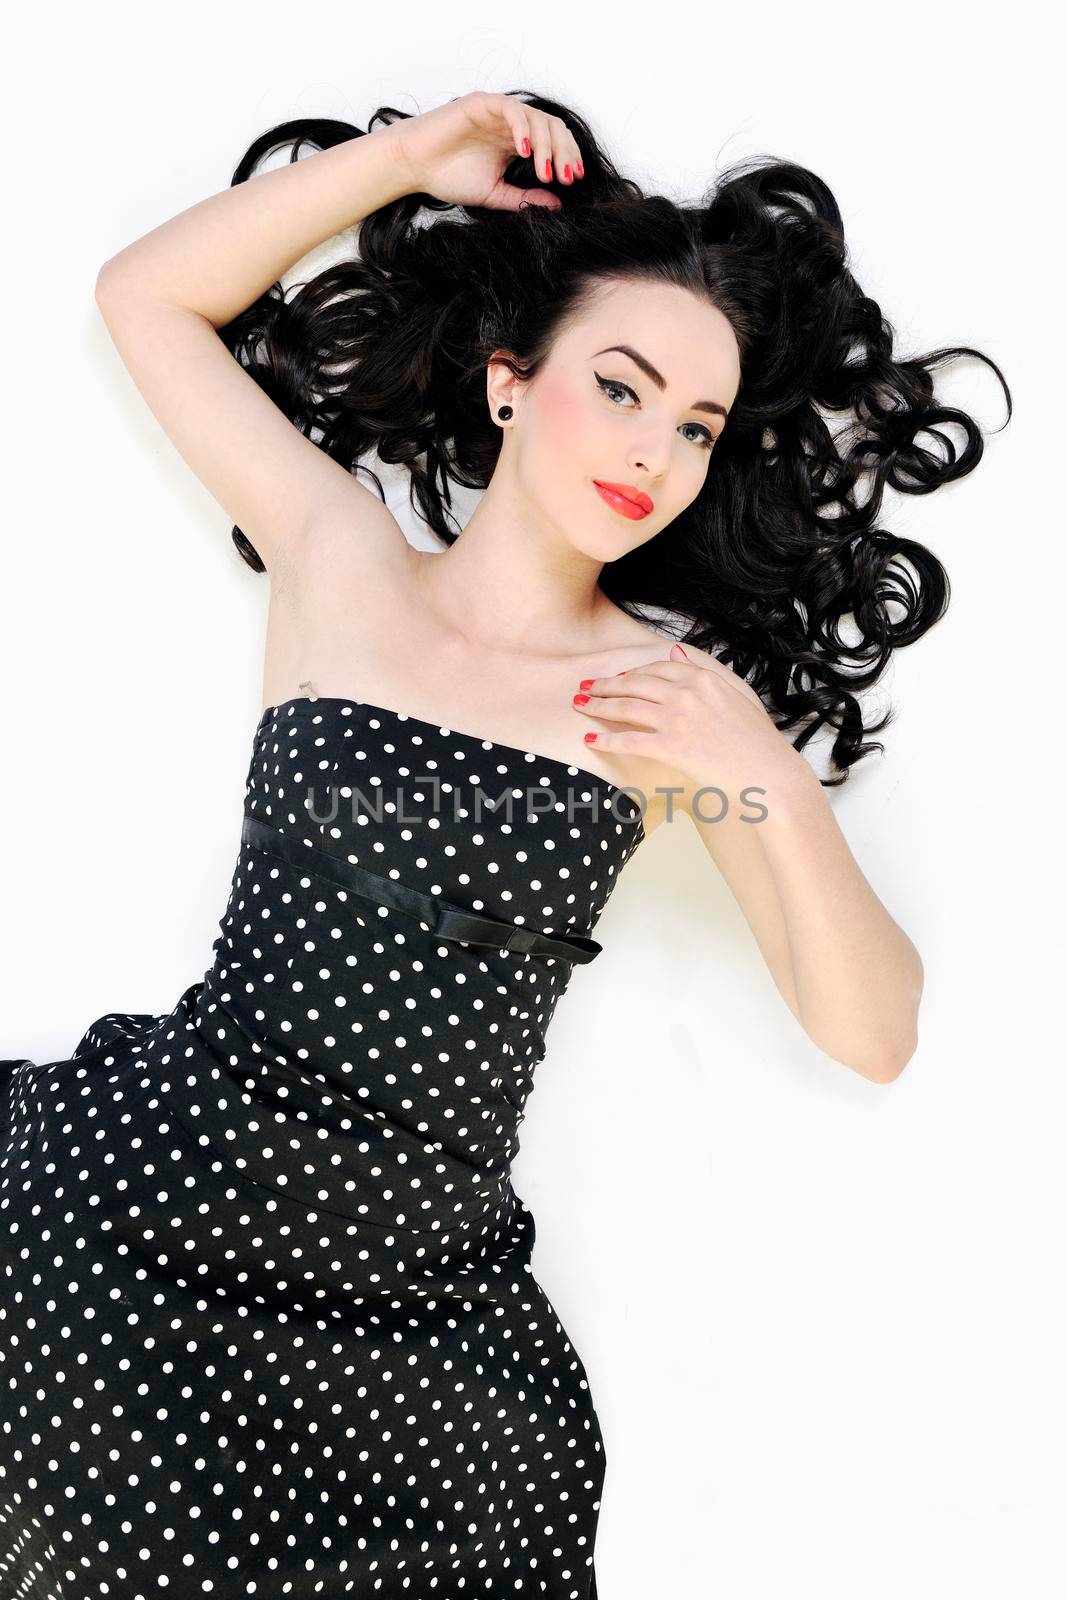 pretty happy young pinup girl isolated on white in studio representing old fashion concept and style